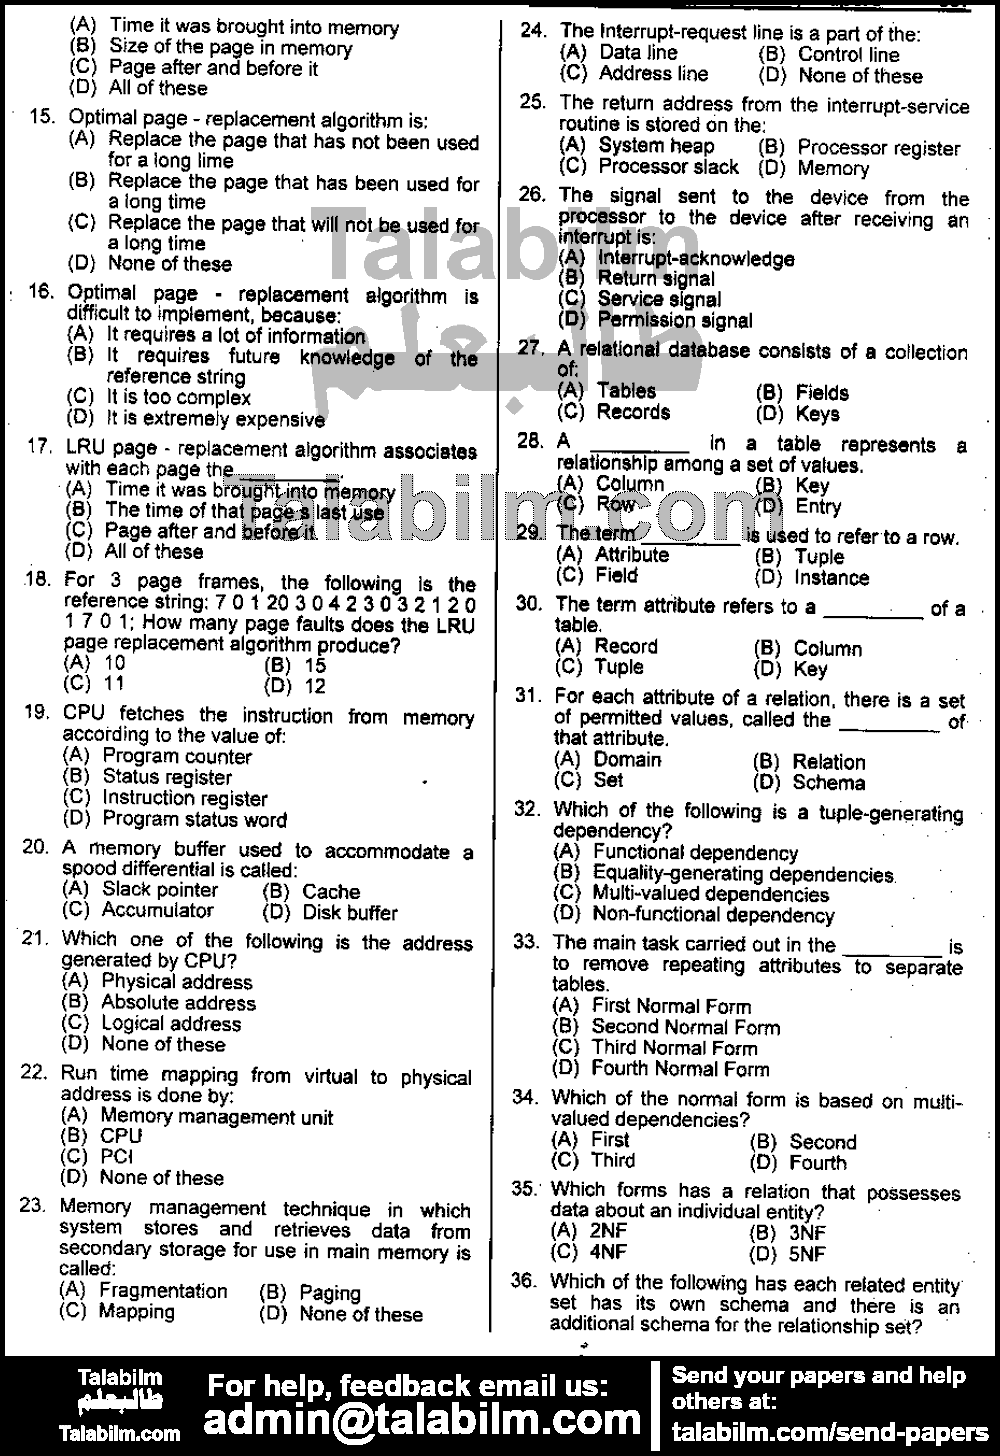 Computer Science Lecturer 0 past paper for 2017 Page No. 2